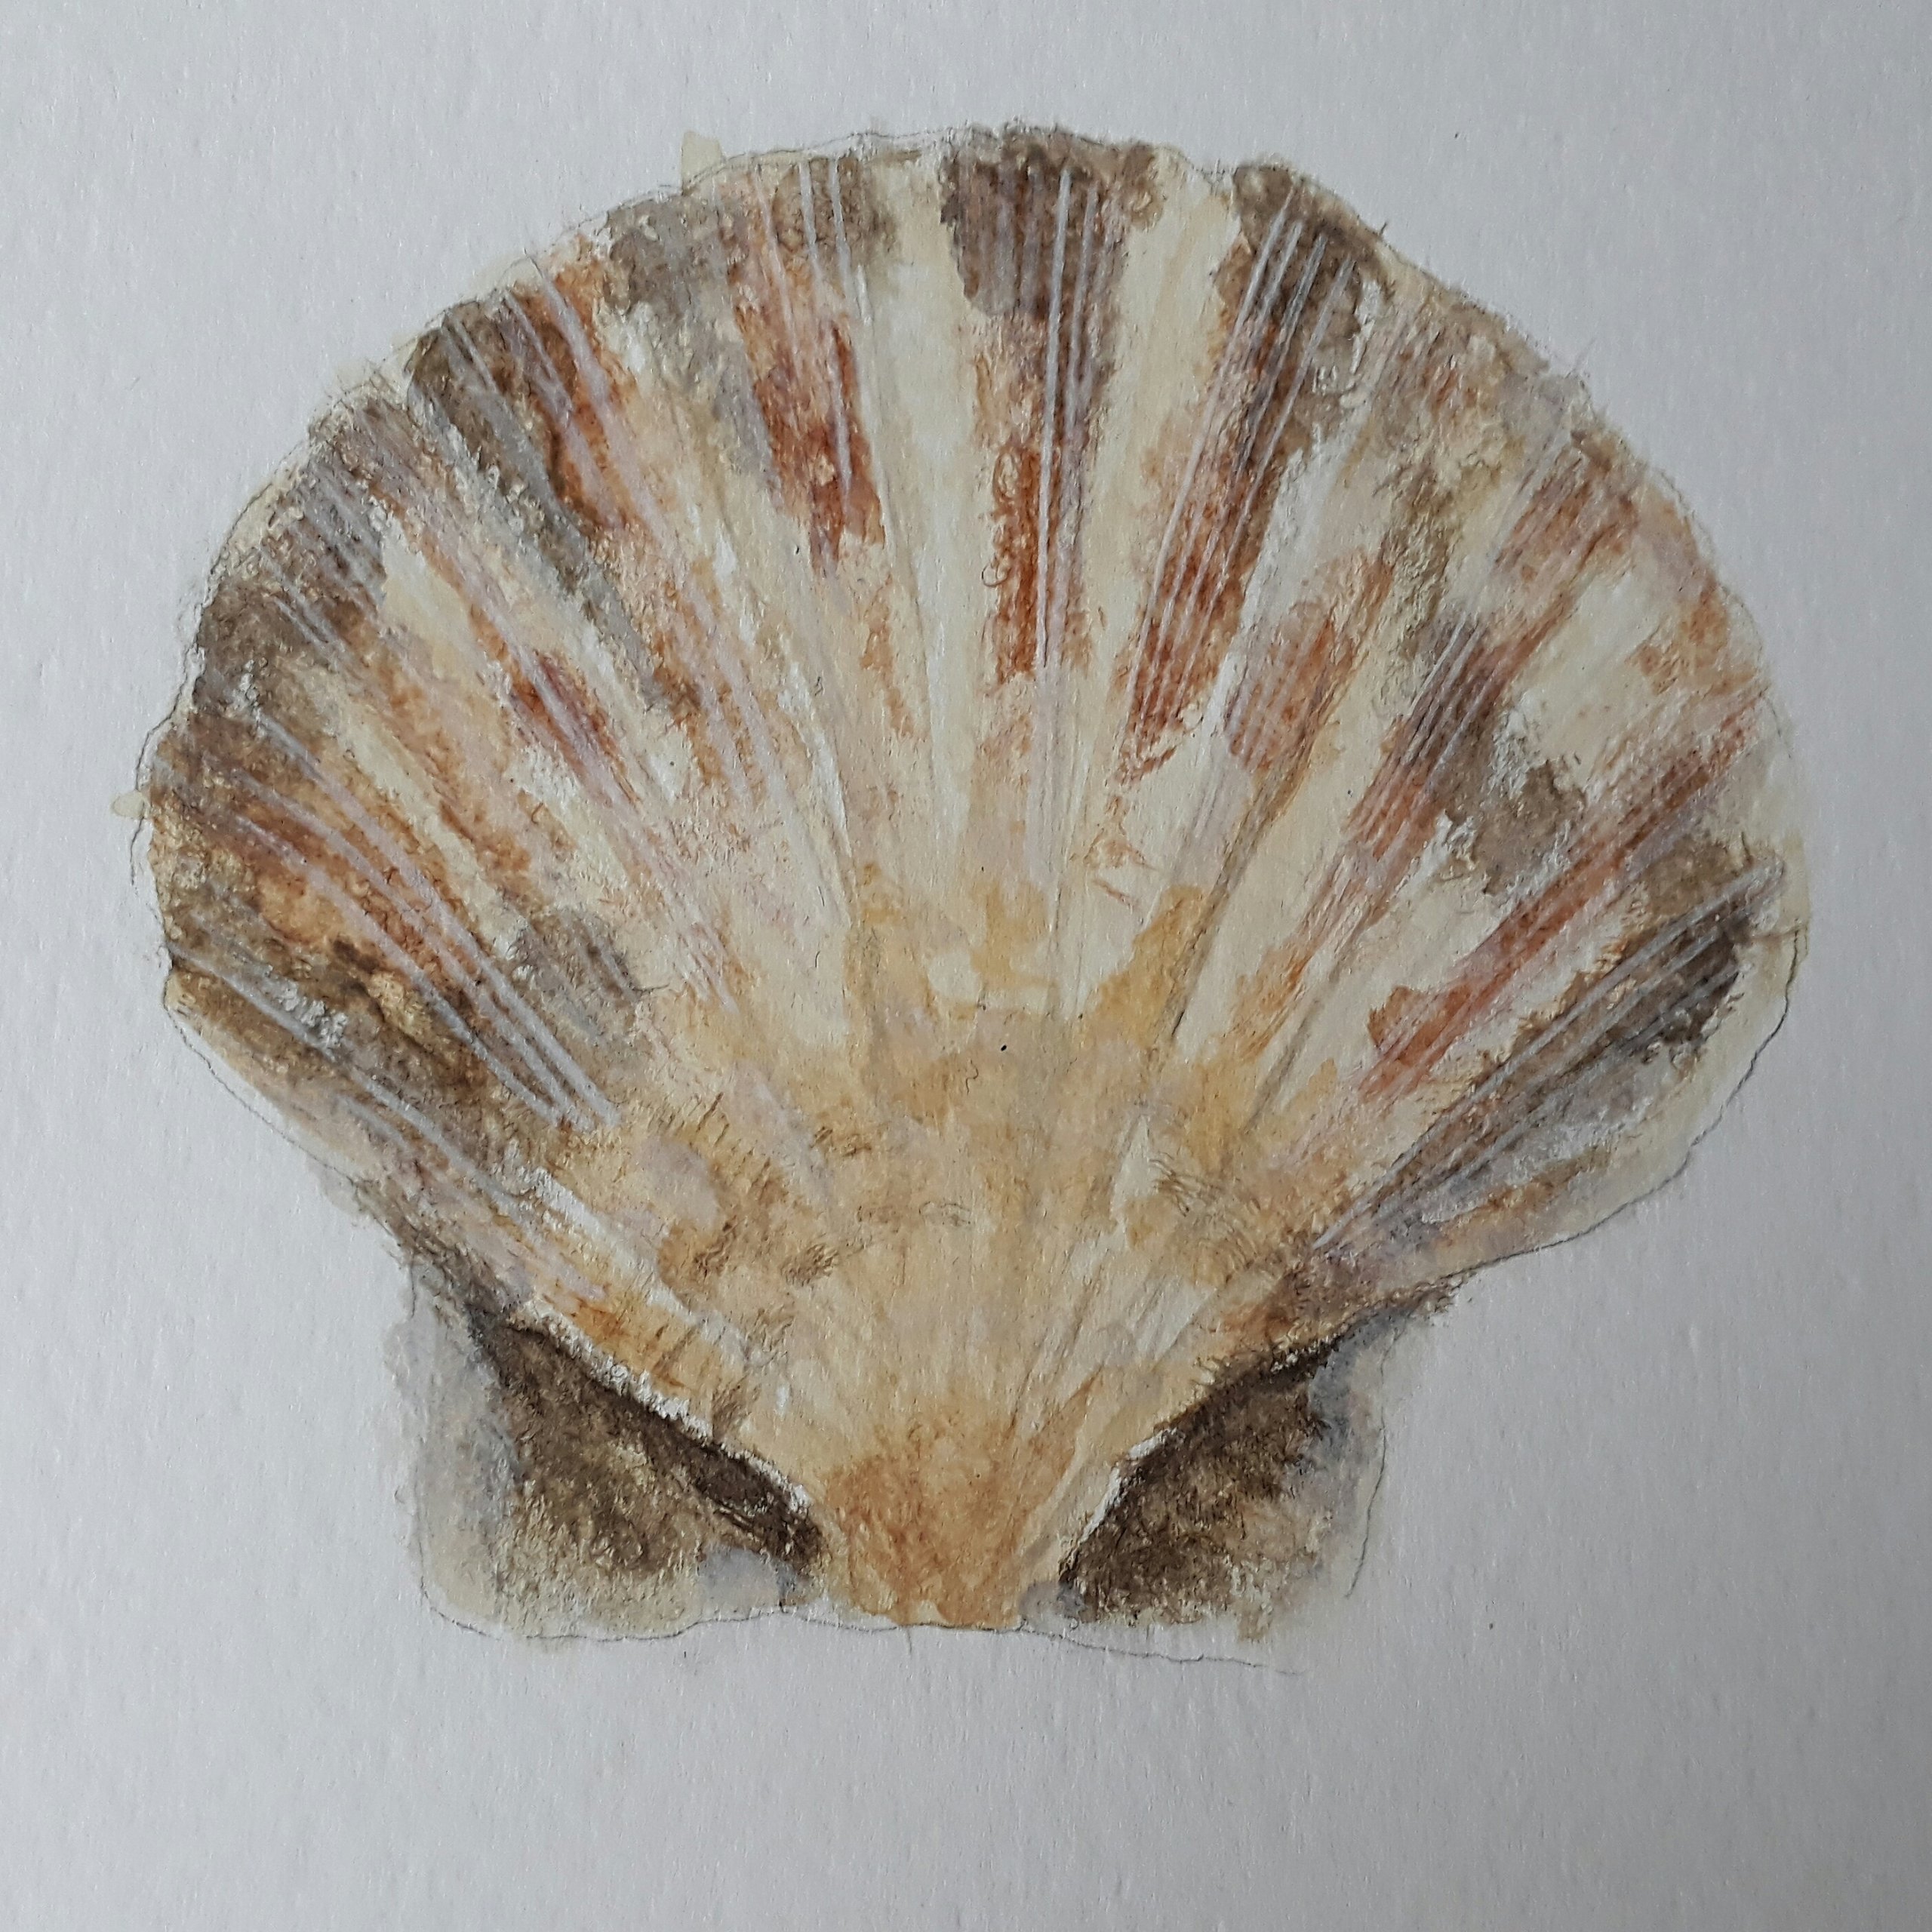 Shell in Watercolour Tutorial